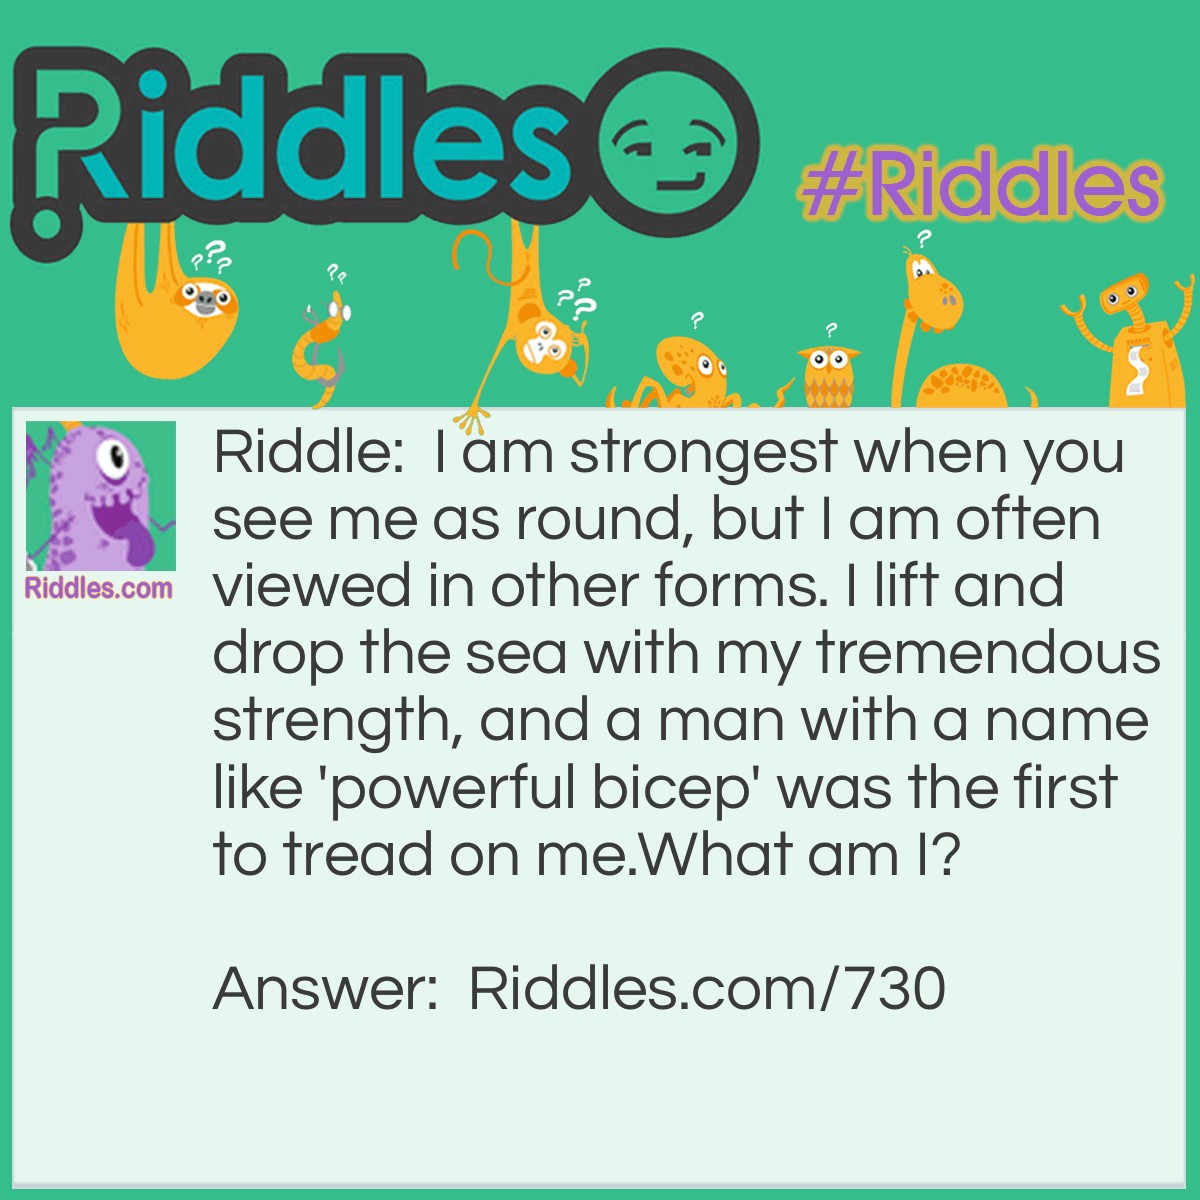 Riddle: I am strongest when you see me as round, but I am often viewed in other forms. I lift and drop the sea with my tremendous strength, and a man with a name like 'powerful bicep' was the first to tread on me. 
What am I? Answer: I am the moon.